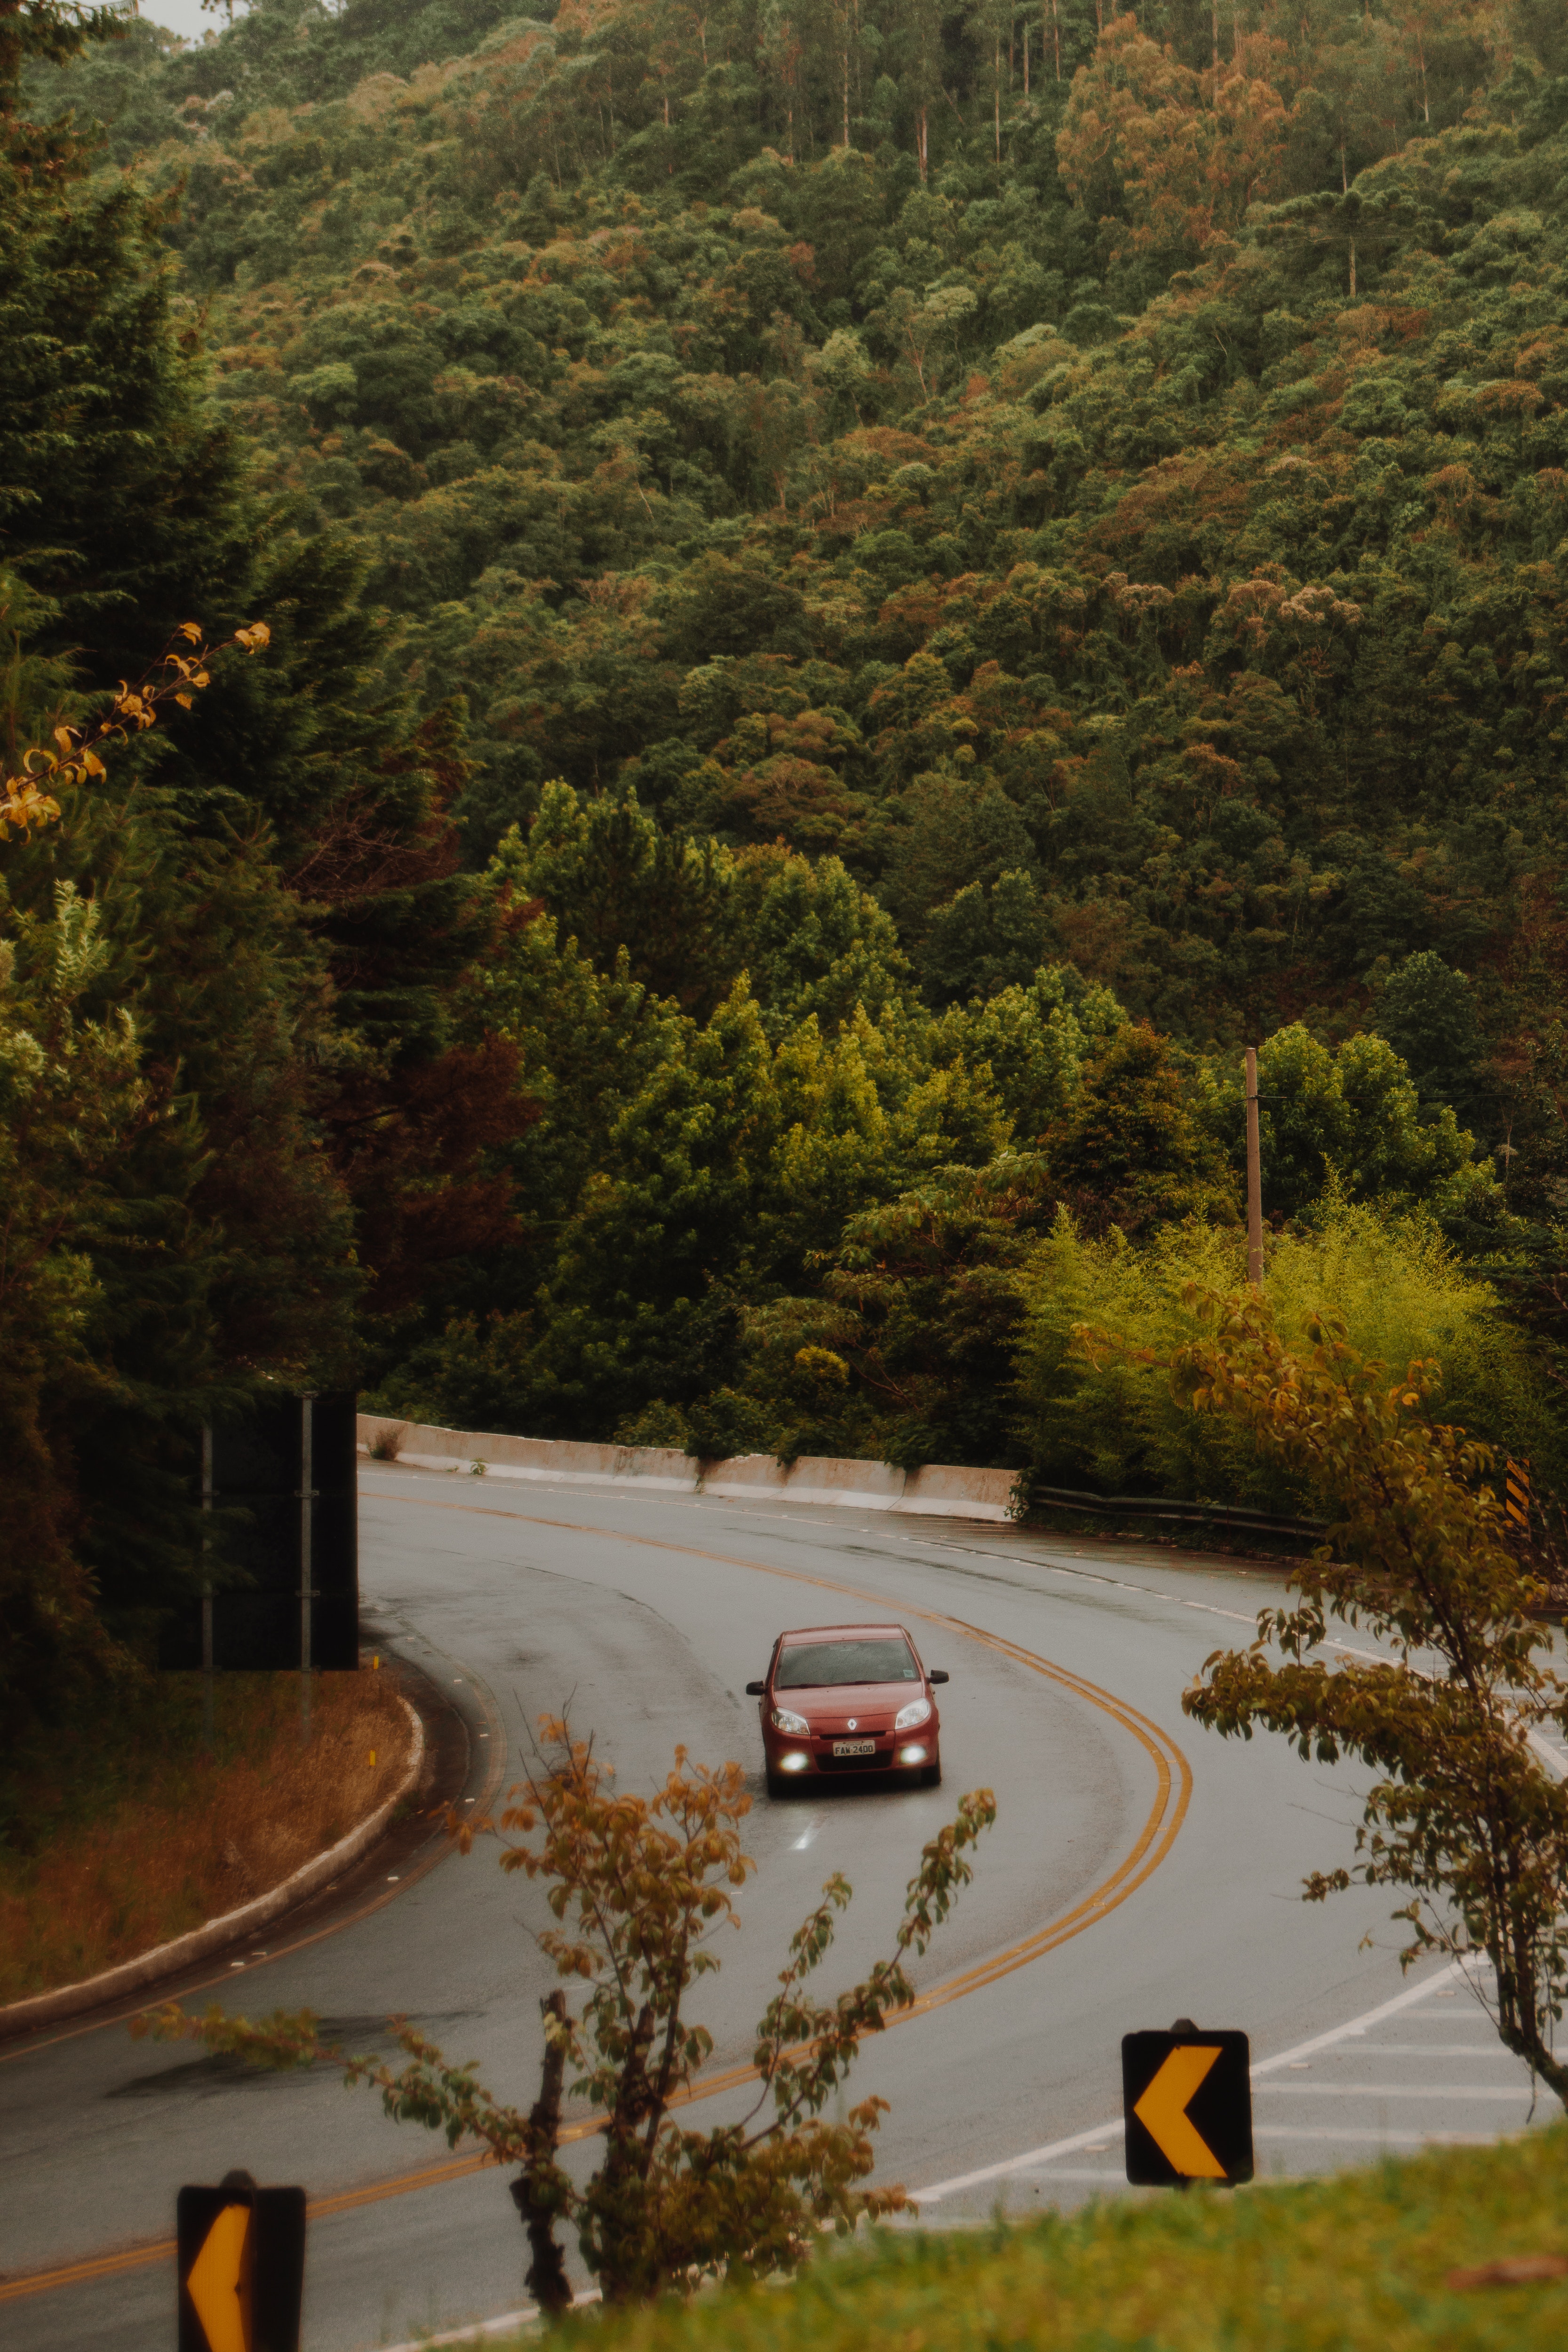 Red Car Travels on the Curved Road, Car, Vehicle, Trees, Travel, HQ Photo